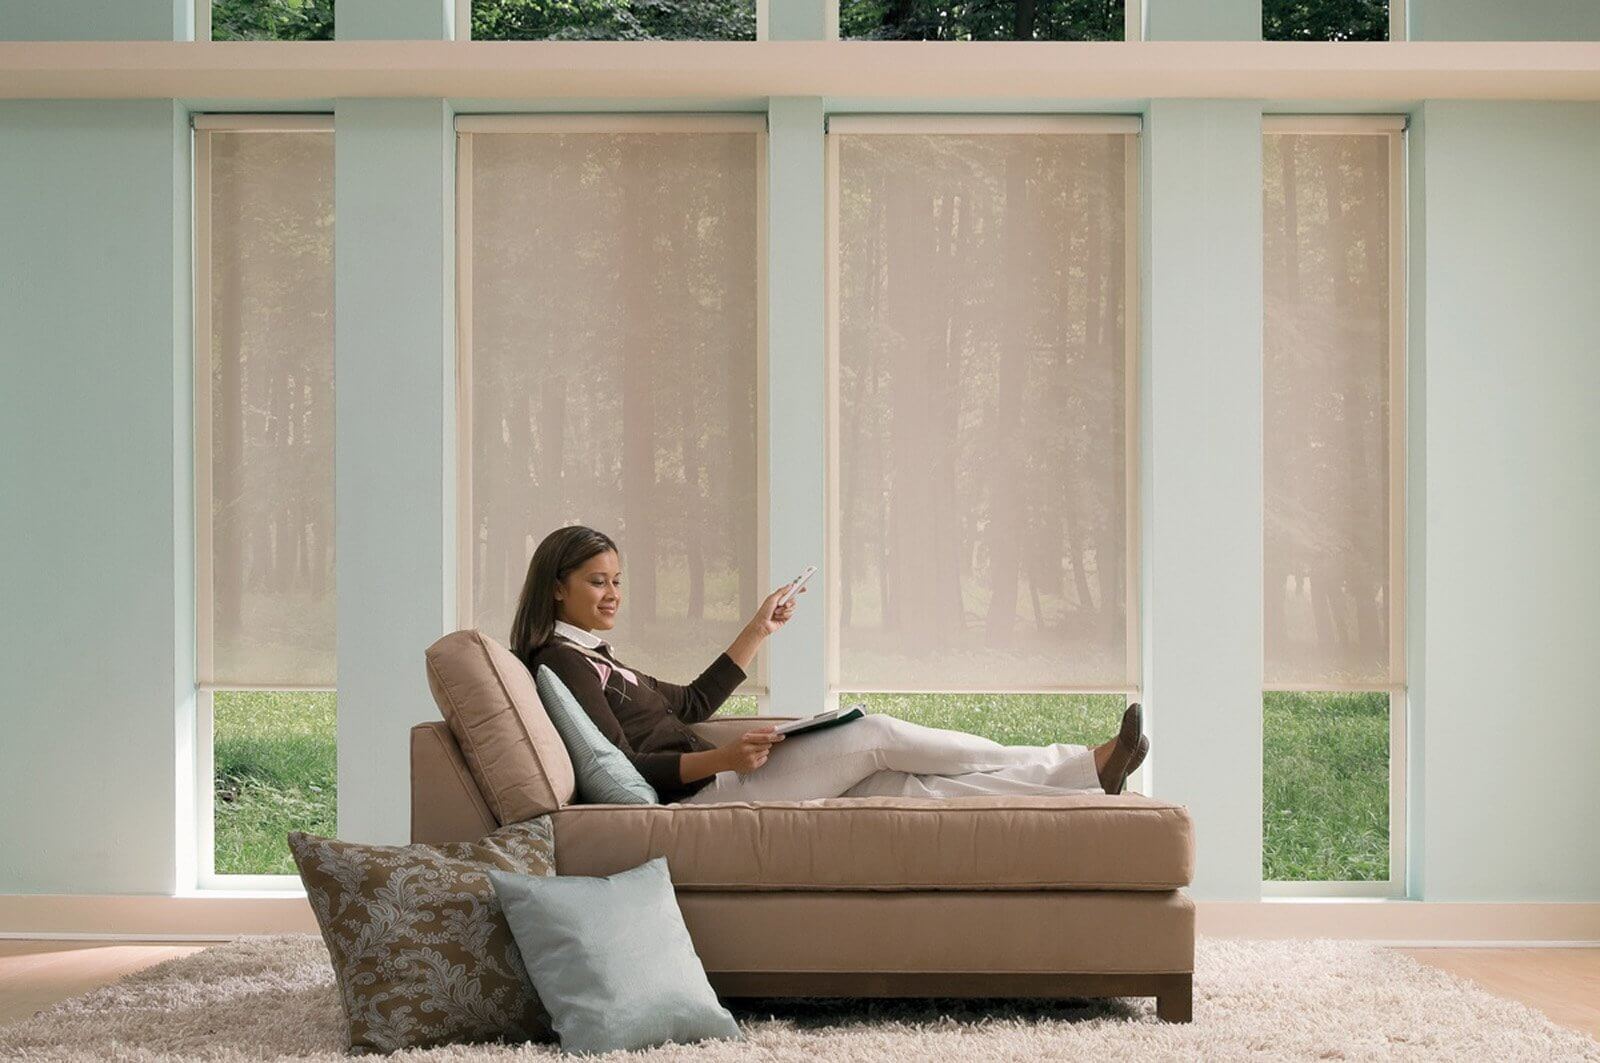 Motorized Window Treatments for Home Automation